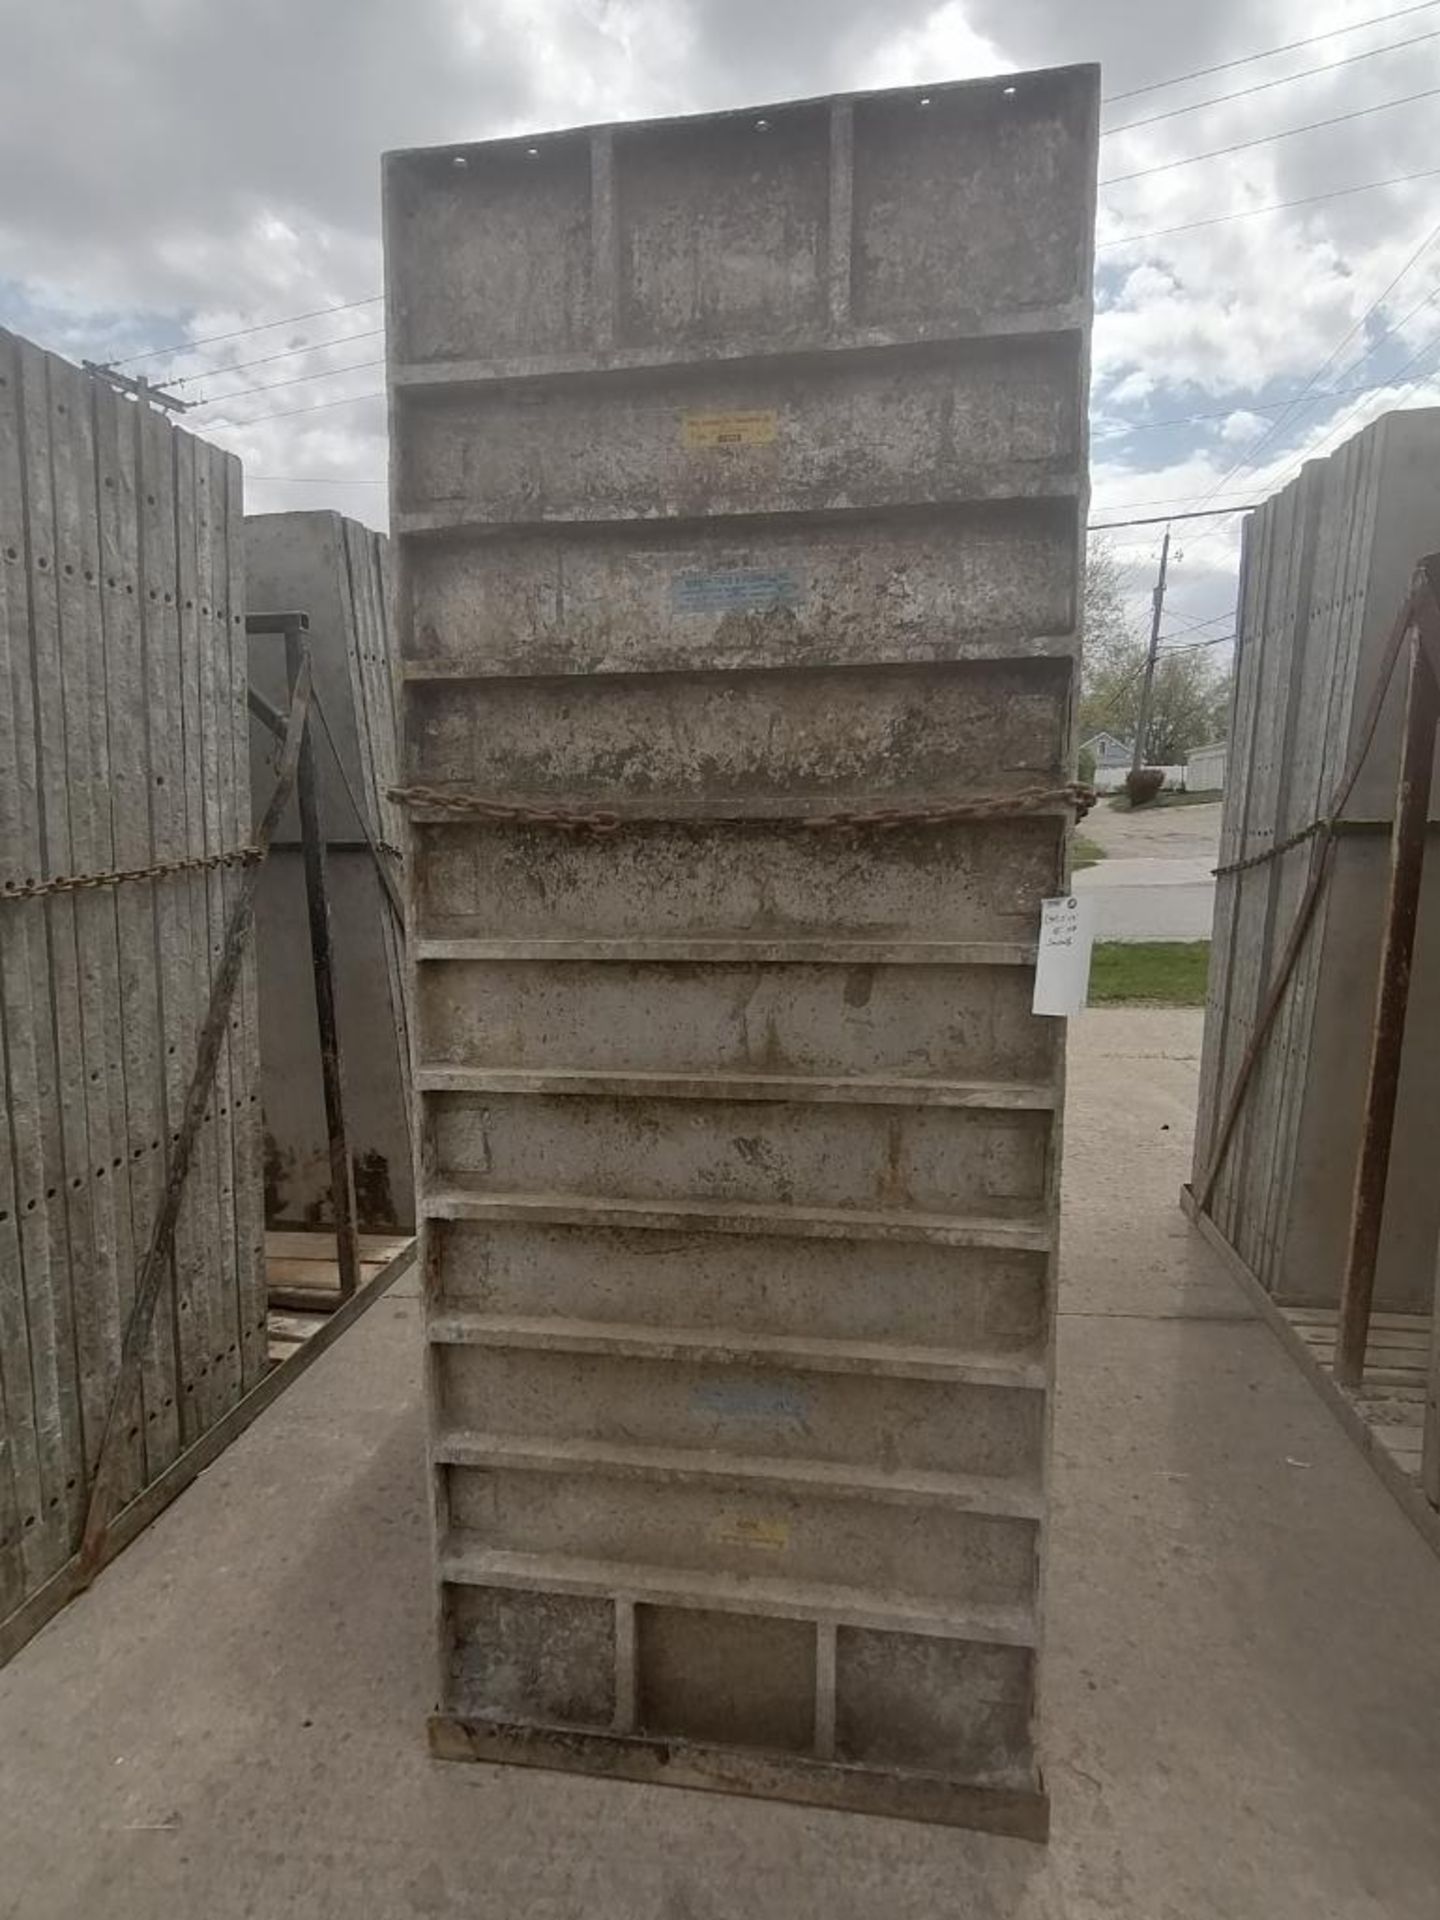 (30) 3' x 8' Wall-Ties Smooth Aluminum Concrete Forms 8" Hole Pattern, Basket is included. Located - Image 6 of 10